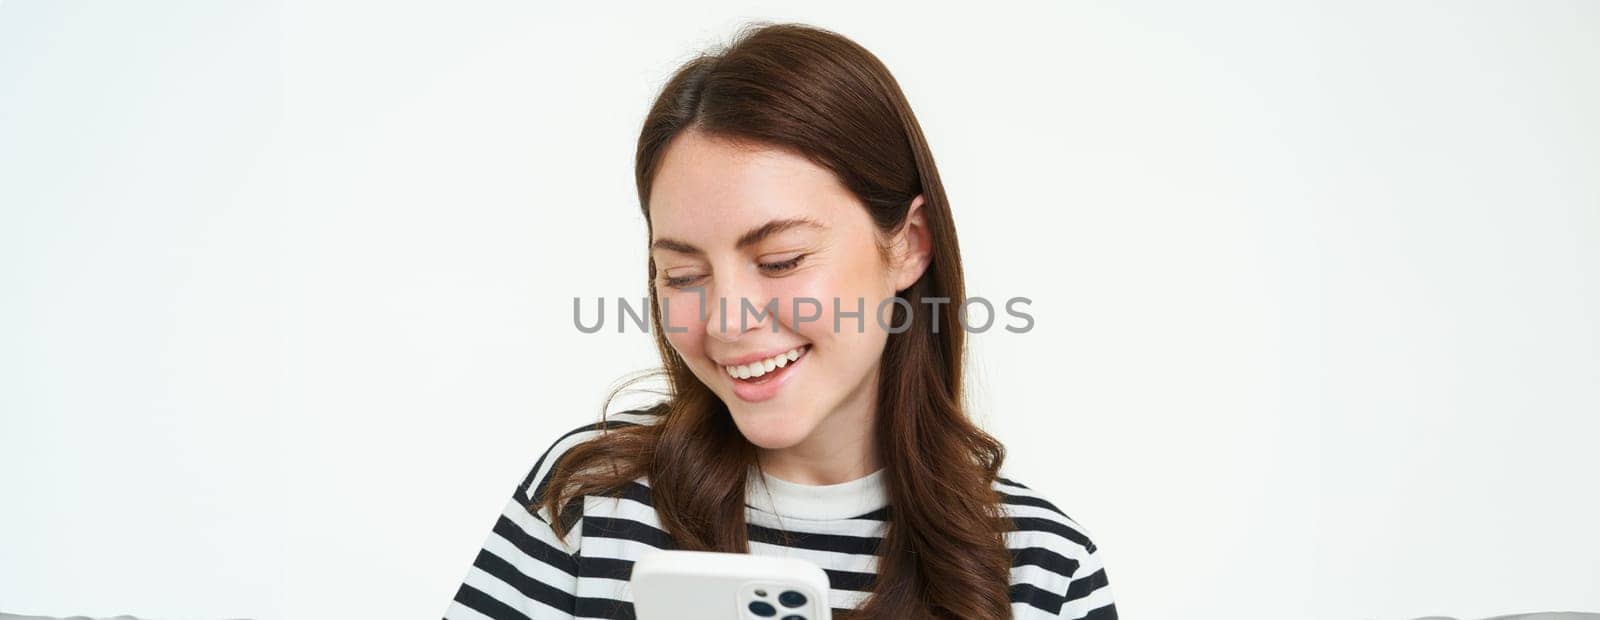 Portrait of girl with smartphone laughing, using mobile phone app, isolated on white background.